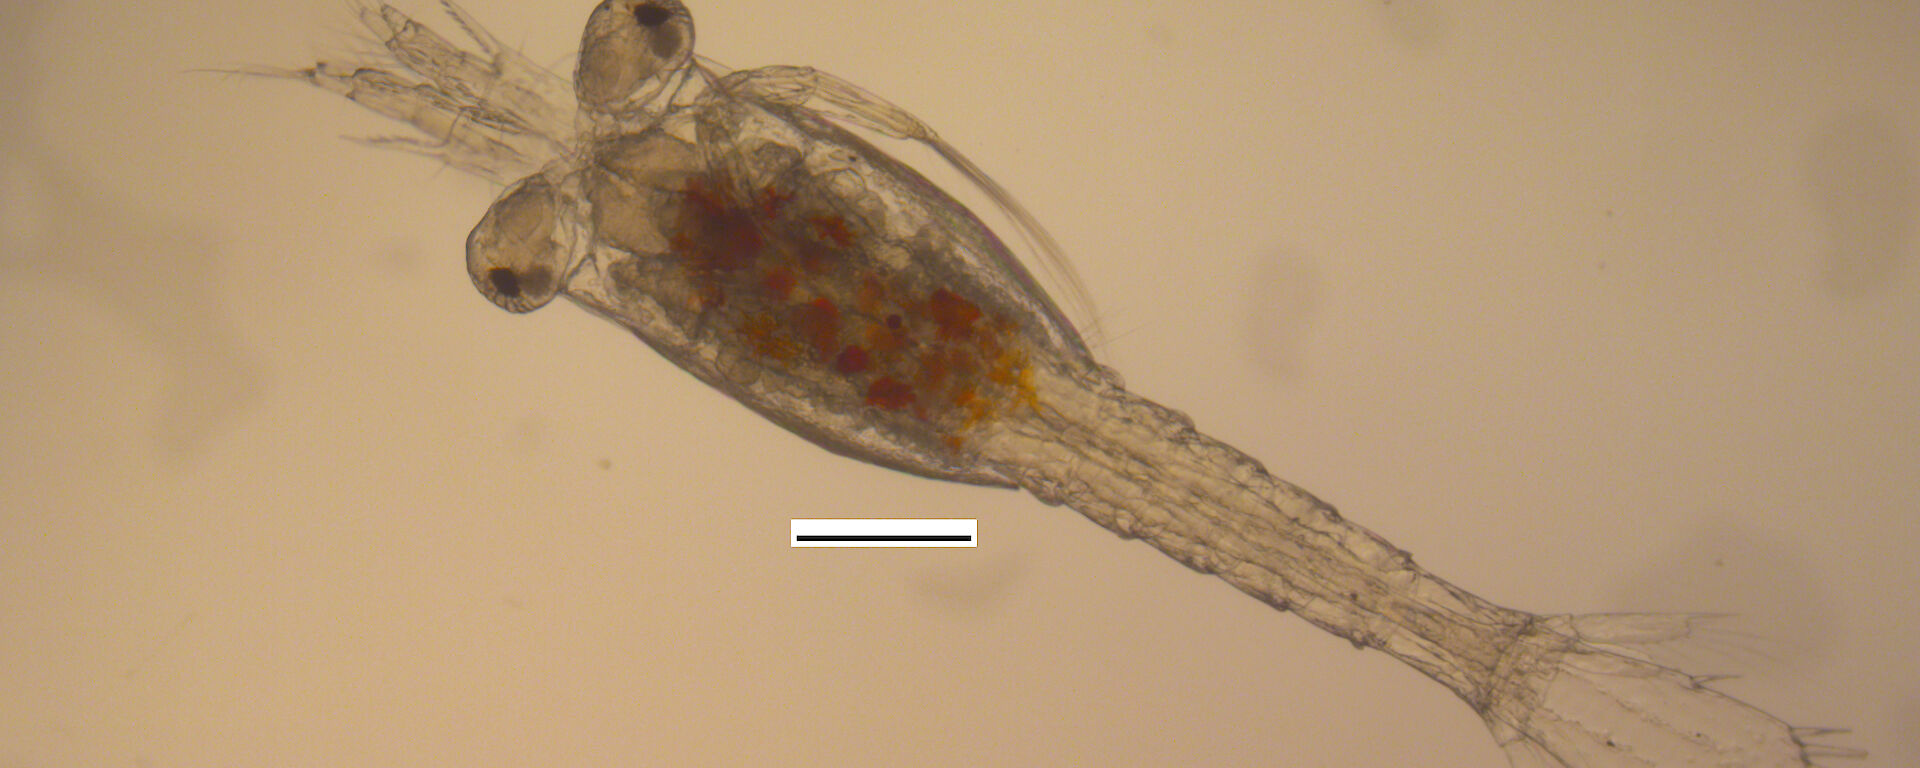 Microscopic image of the the first stage of the Furcilia phase where the krill takes on the shape of a juvenile